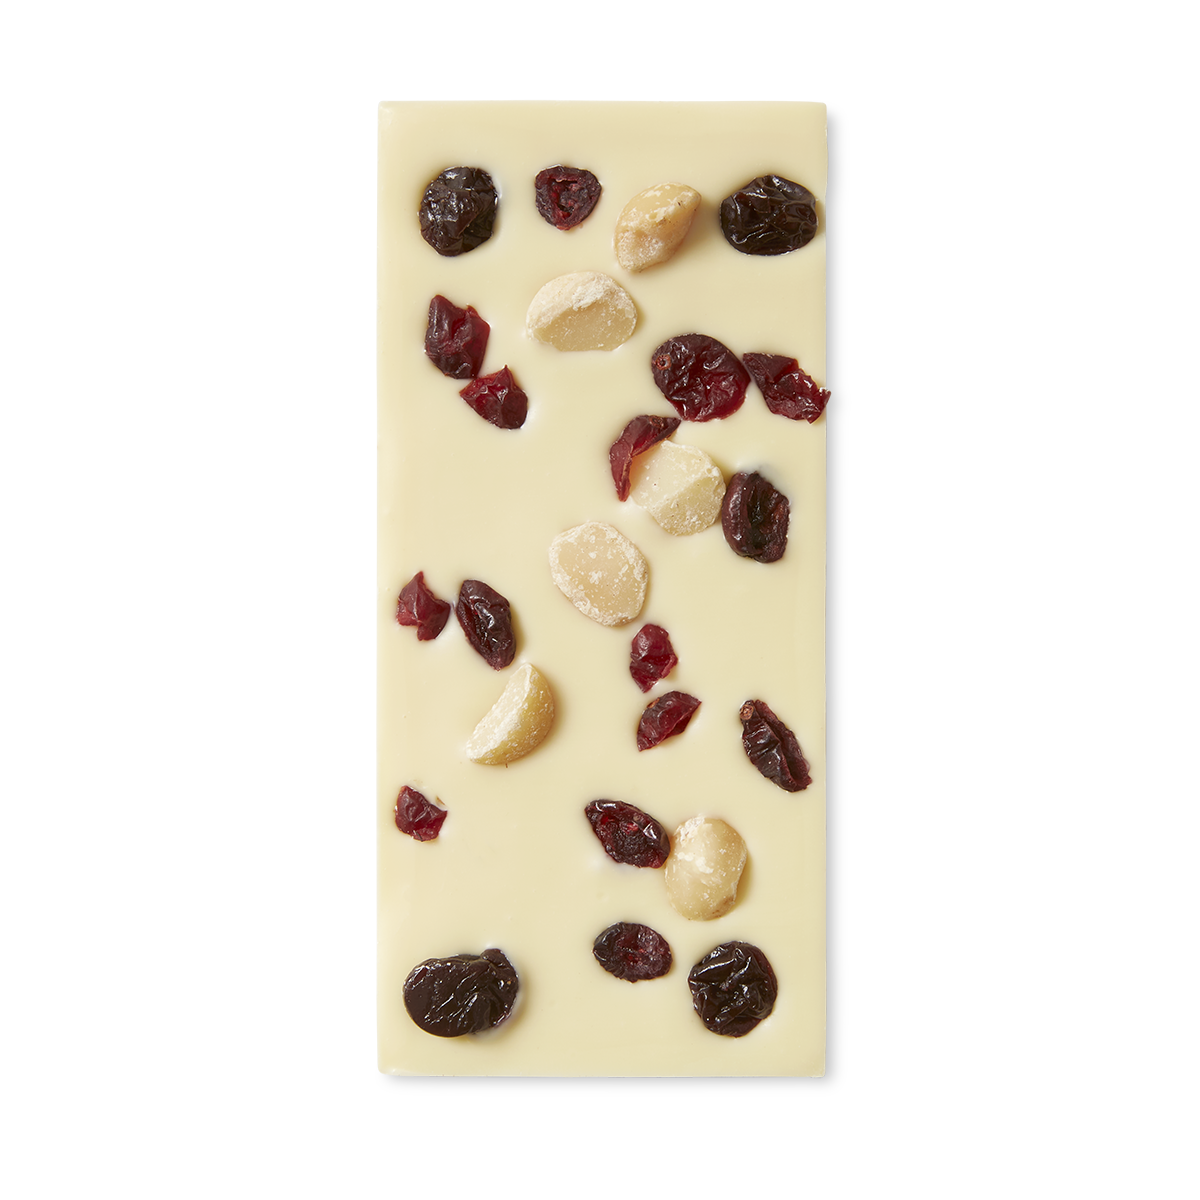 Exposed white chocolate block with fruit and nut pieces